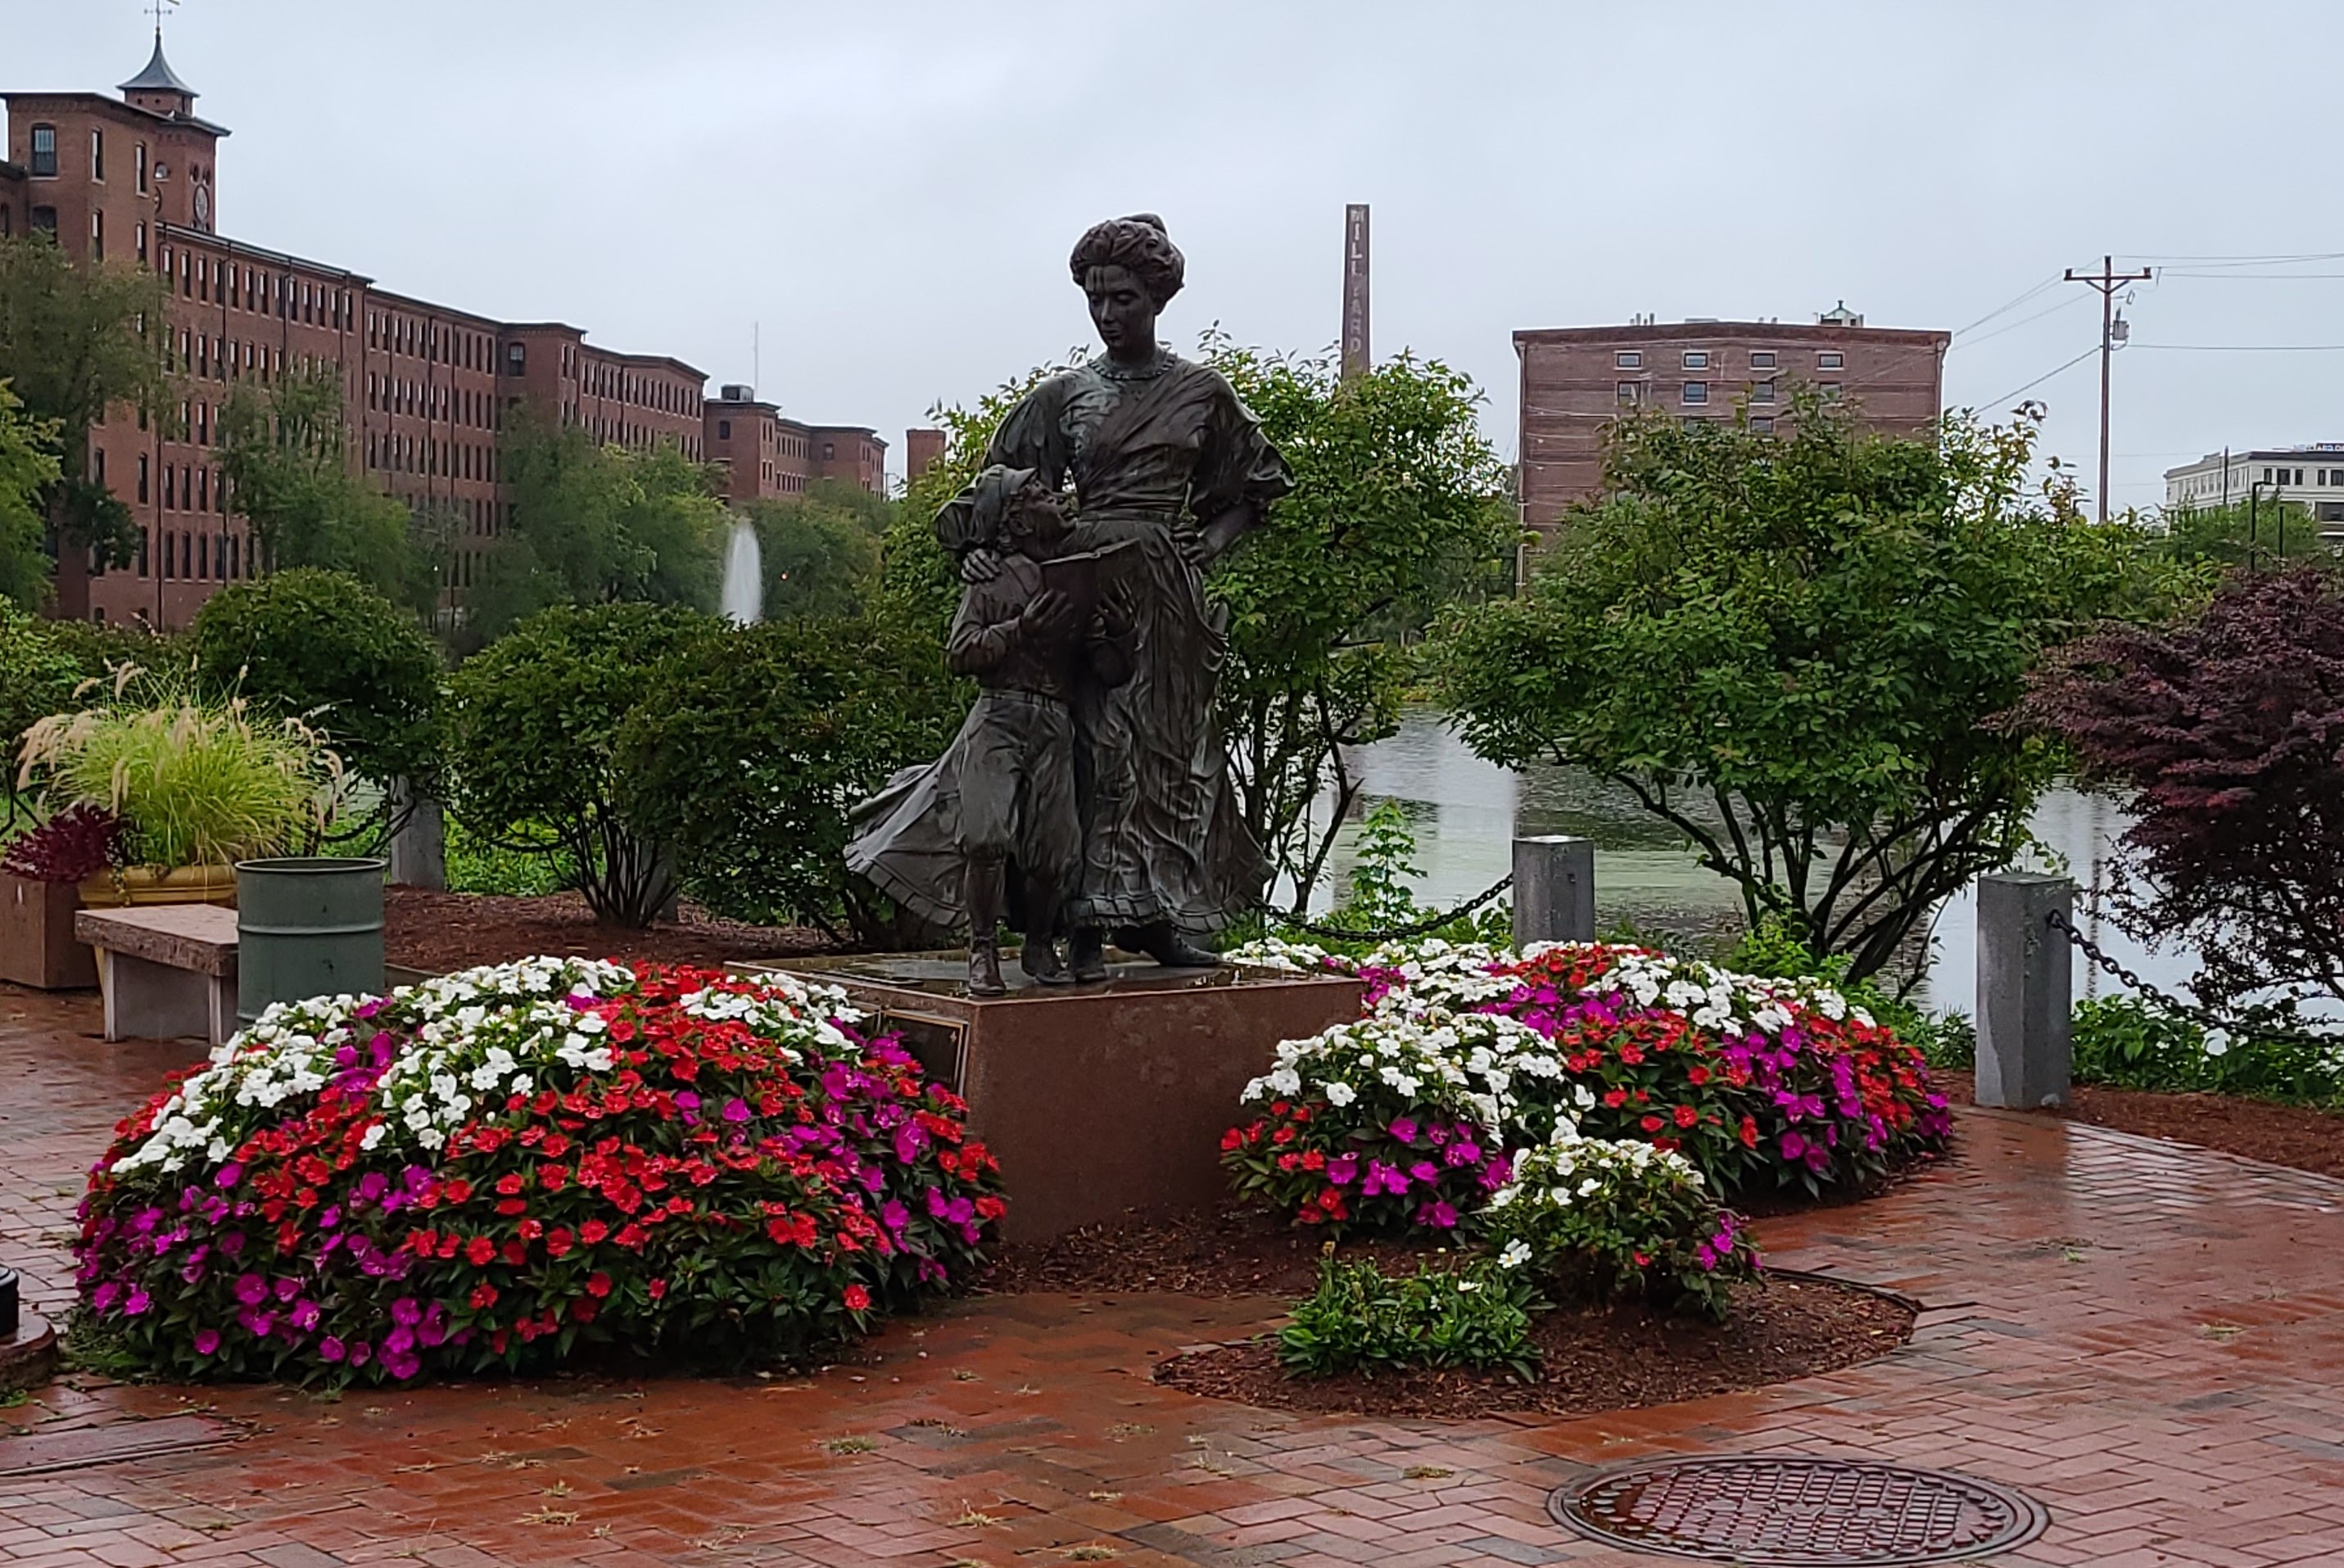 Photo of statue of a woman in dress and a boy looking up at her with an open book in the downtown Nashua garden, flowers blooming around the base of the statue are red, purple, and white, brick buildings populate the background of the photo, presented by Nashua personal injury lawyer Attorney Buckley